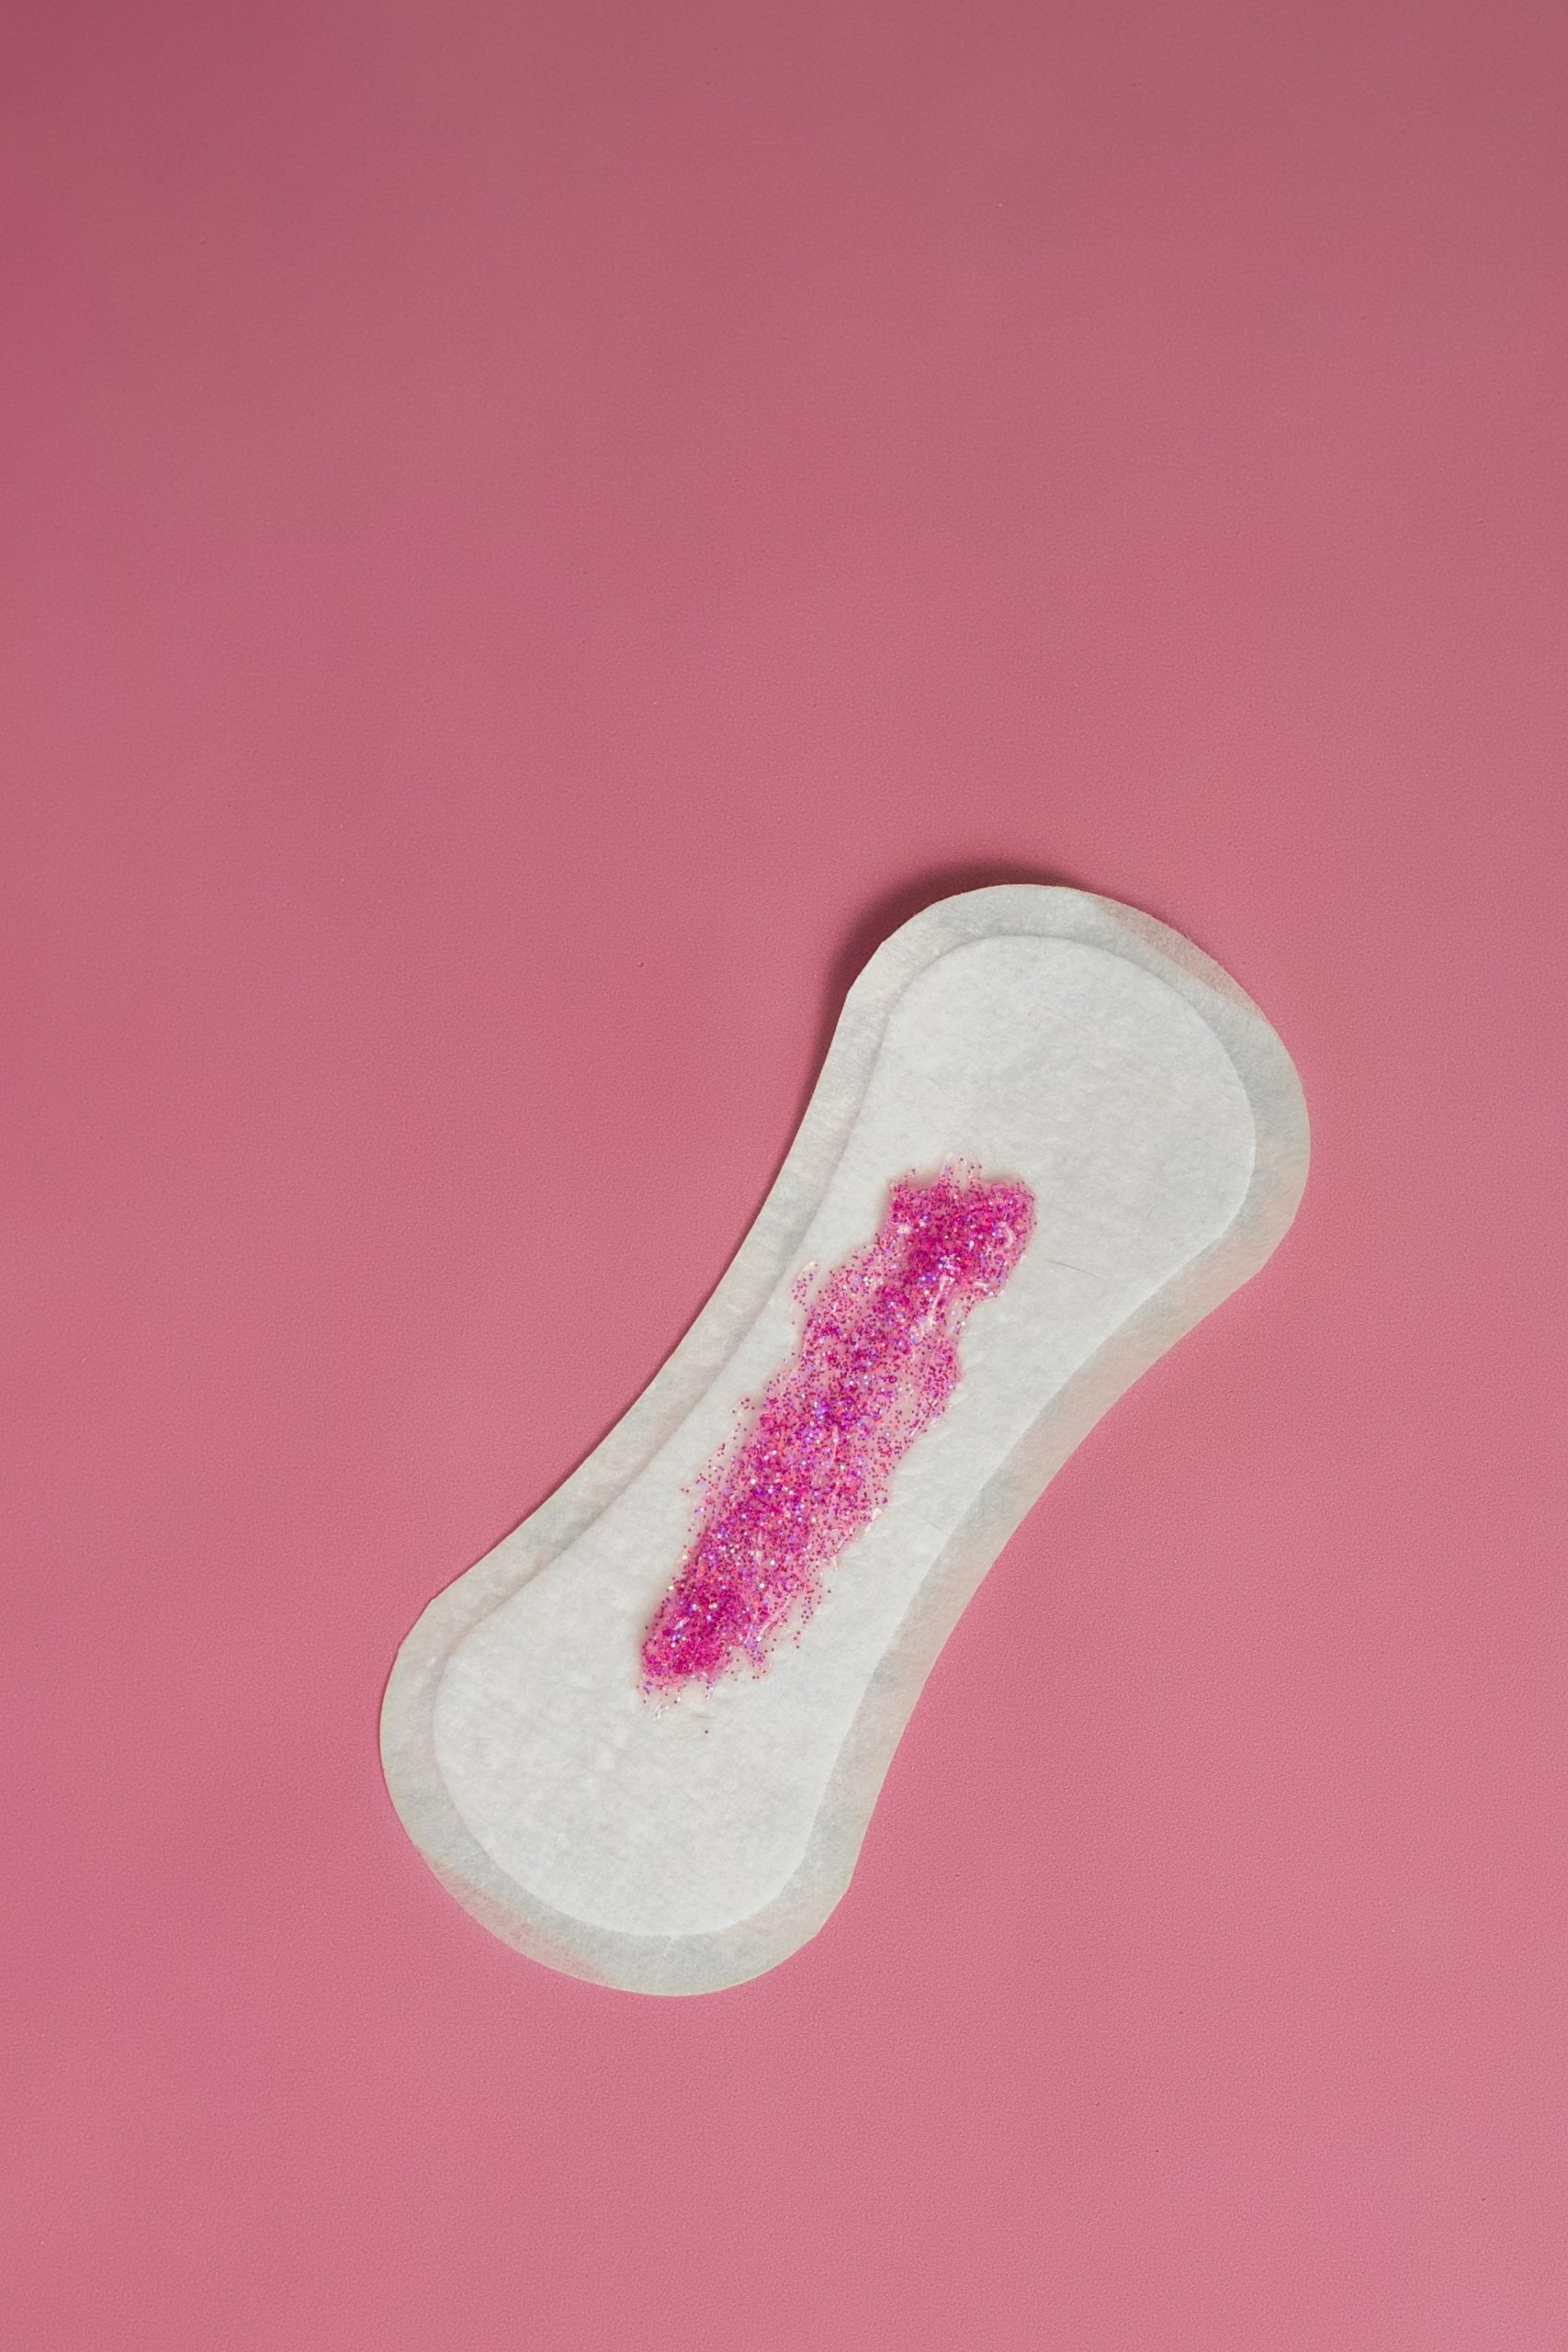 10 Surprising Facts About Periods